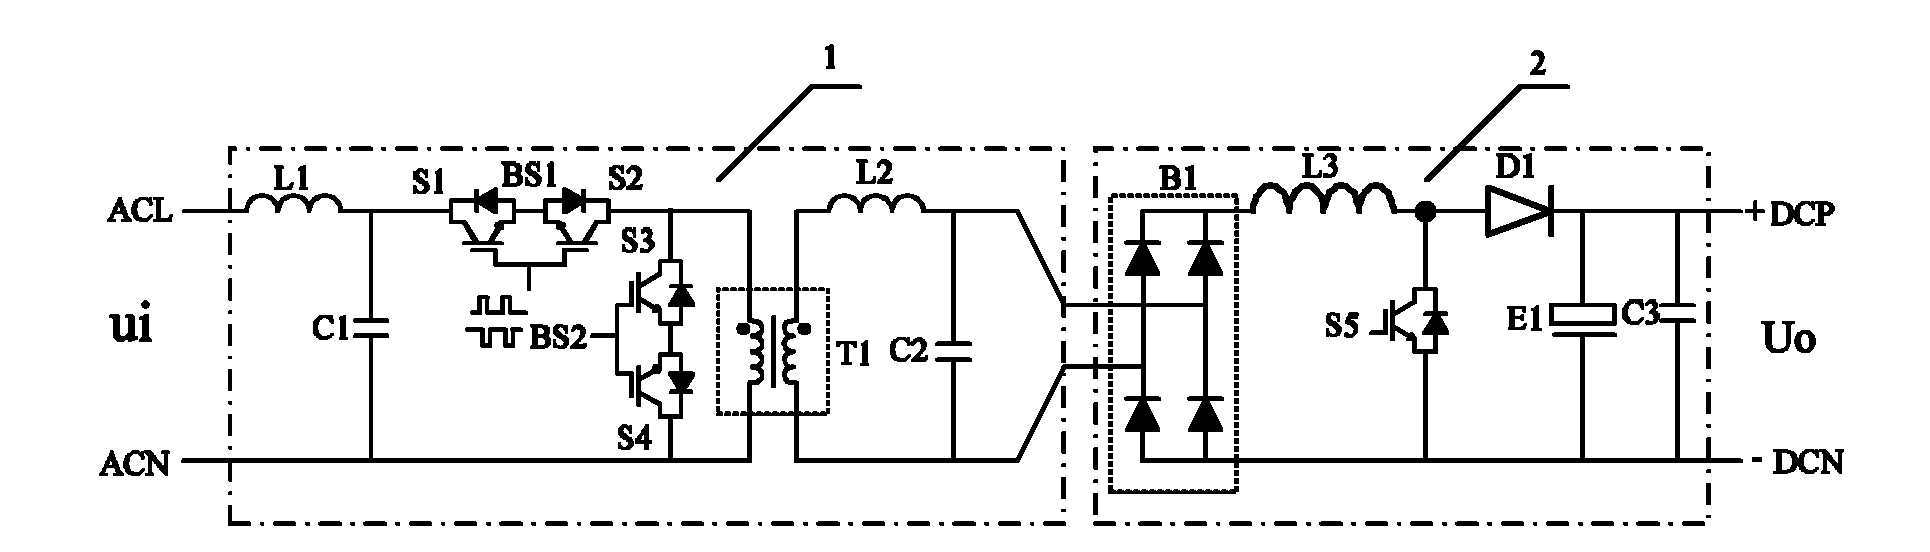 Linear alternating current-direct current (AC-DC) converter for alternating chopped wave